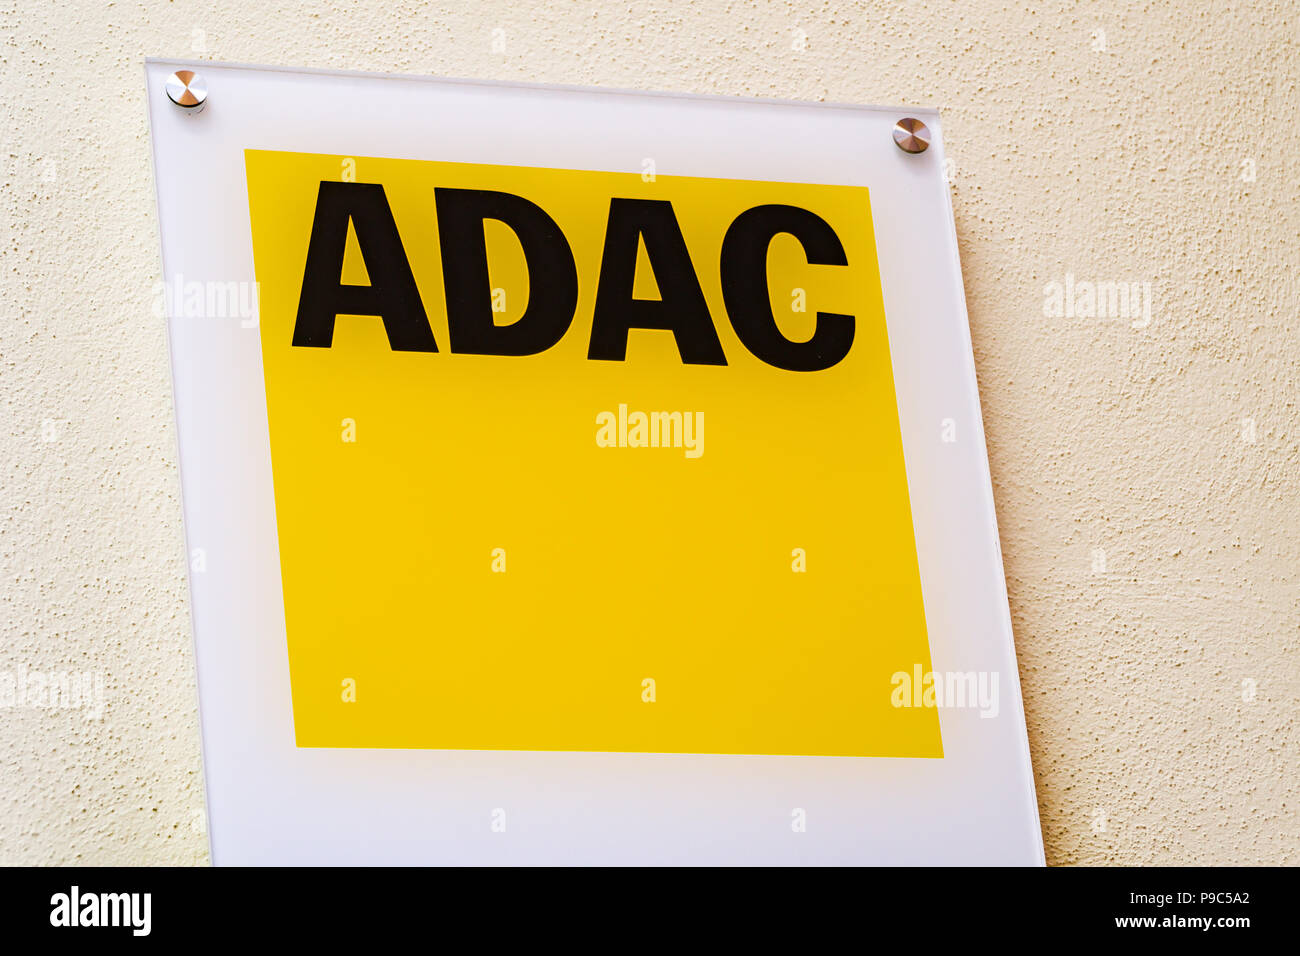 Wiesbaden, Germany - June 03 2018: ADAC logo on a facade. ADAC founded in 1903, is an automobile club in Germany, the largest of Europe. Stock Photo